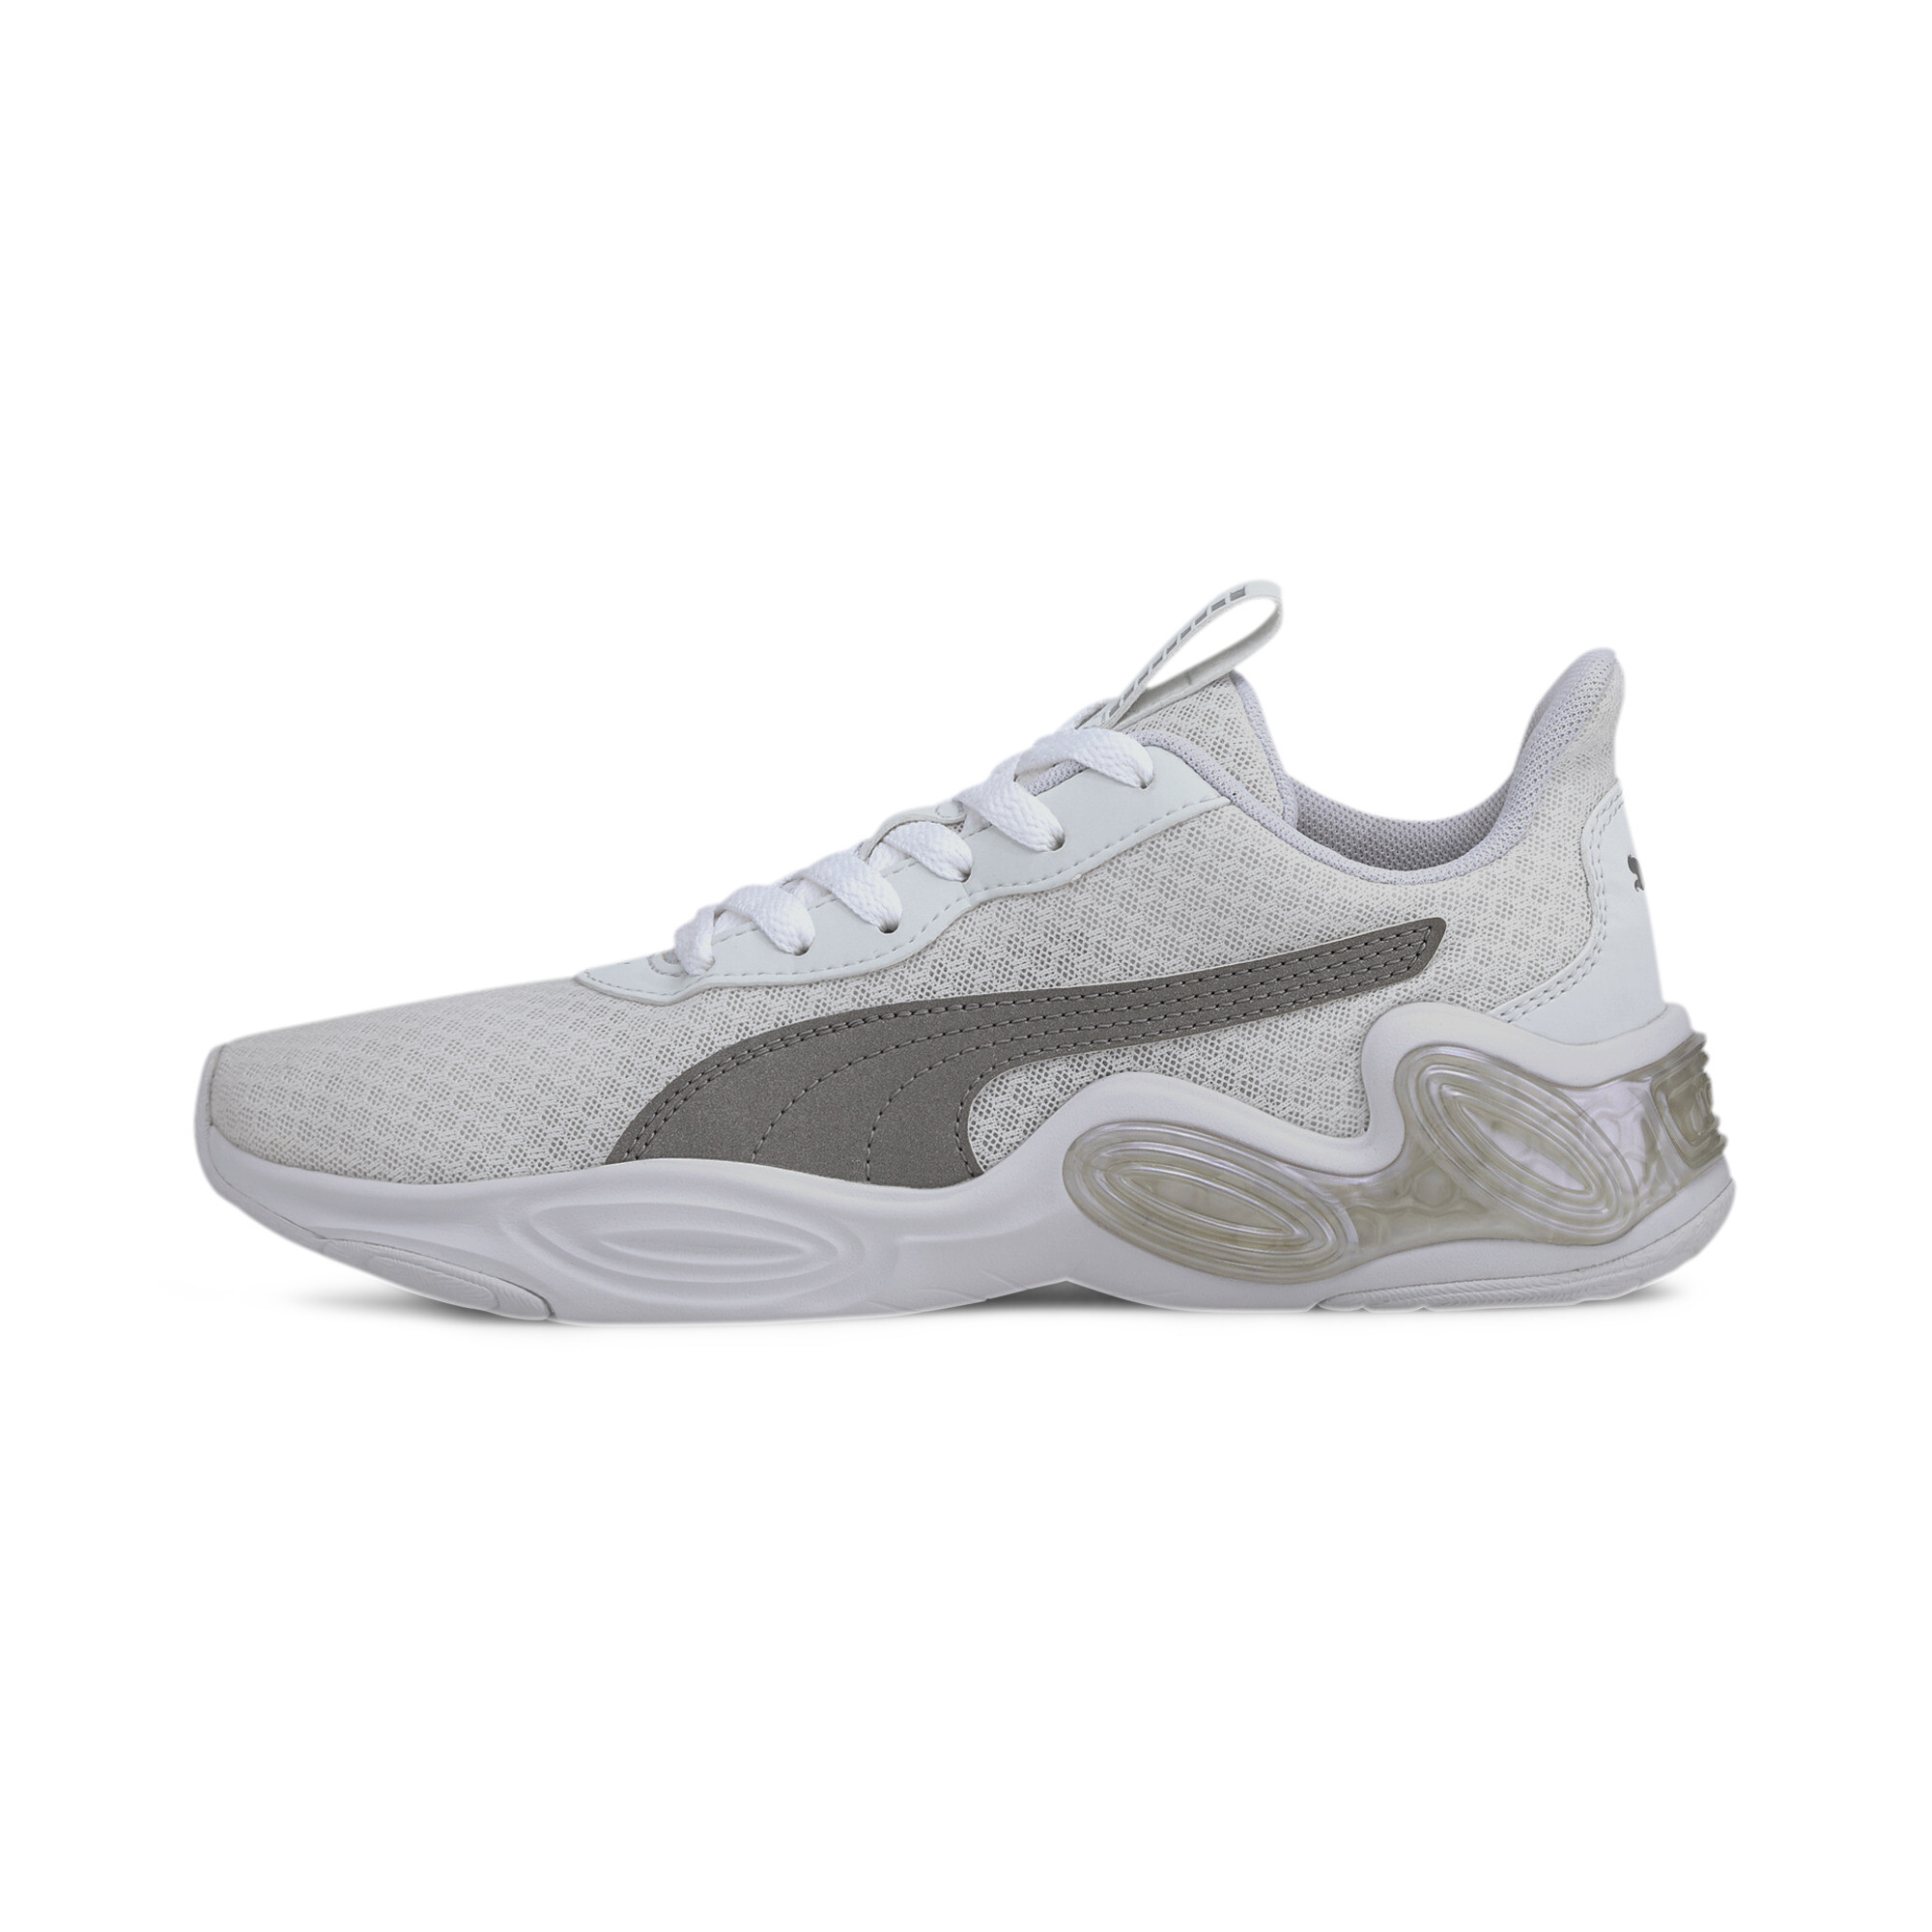 PUMA Women's CELL Magma Clean Training Shoes | eBay